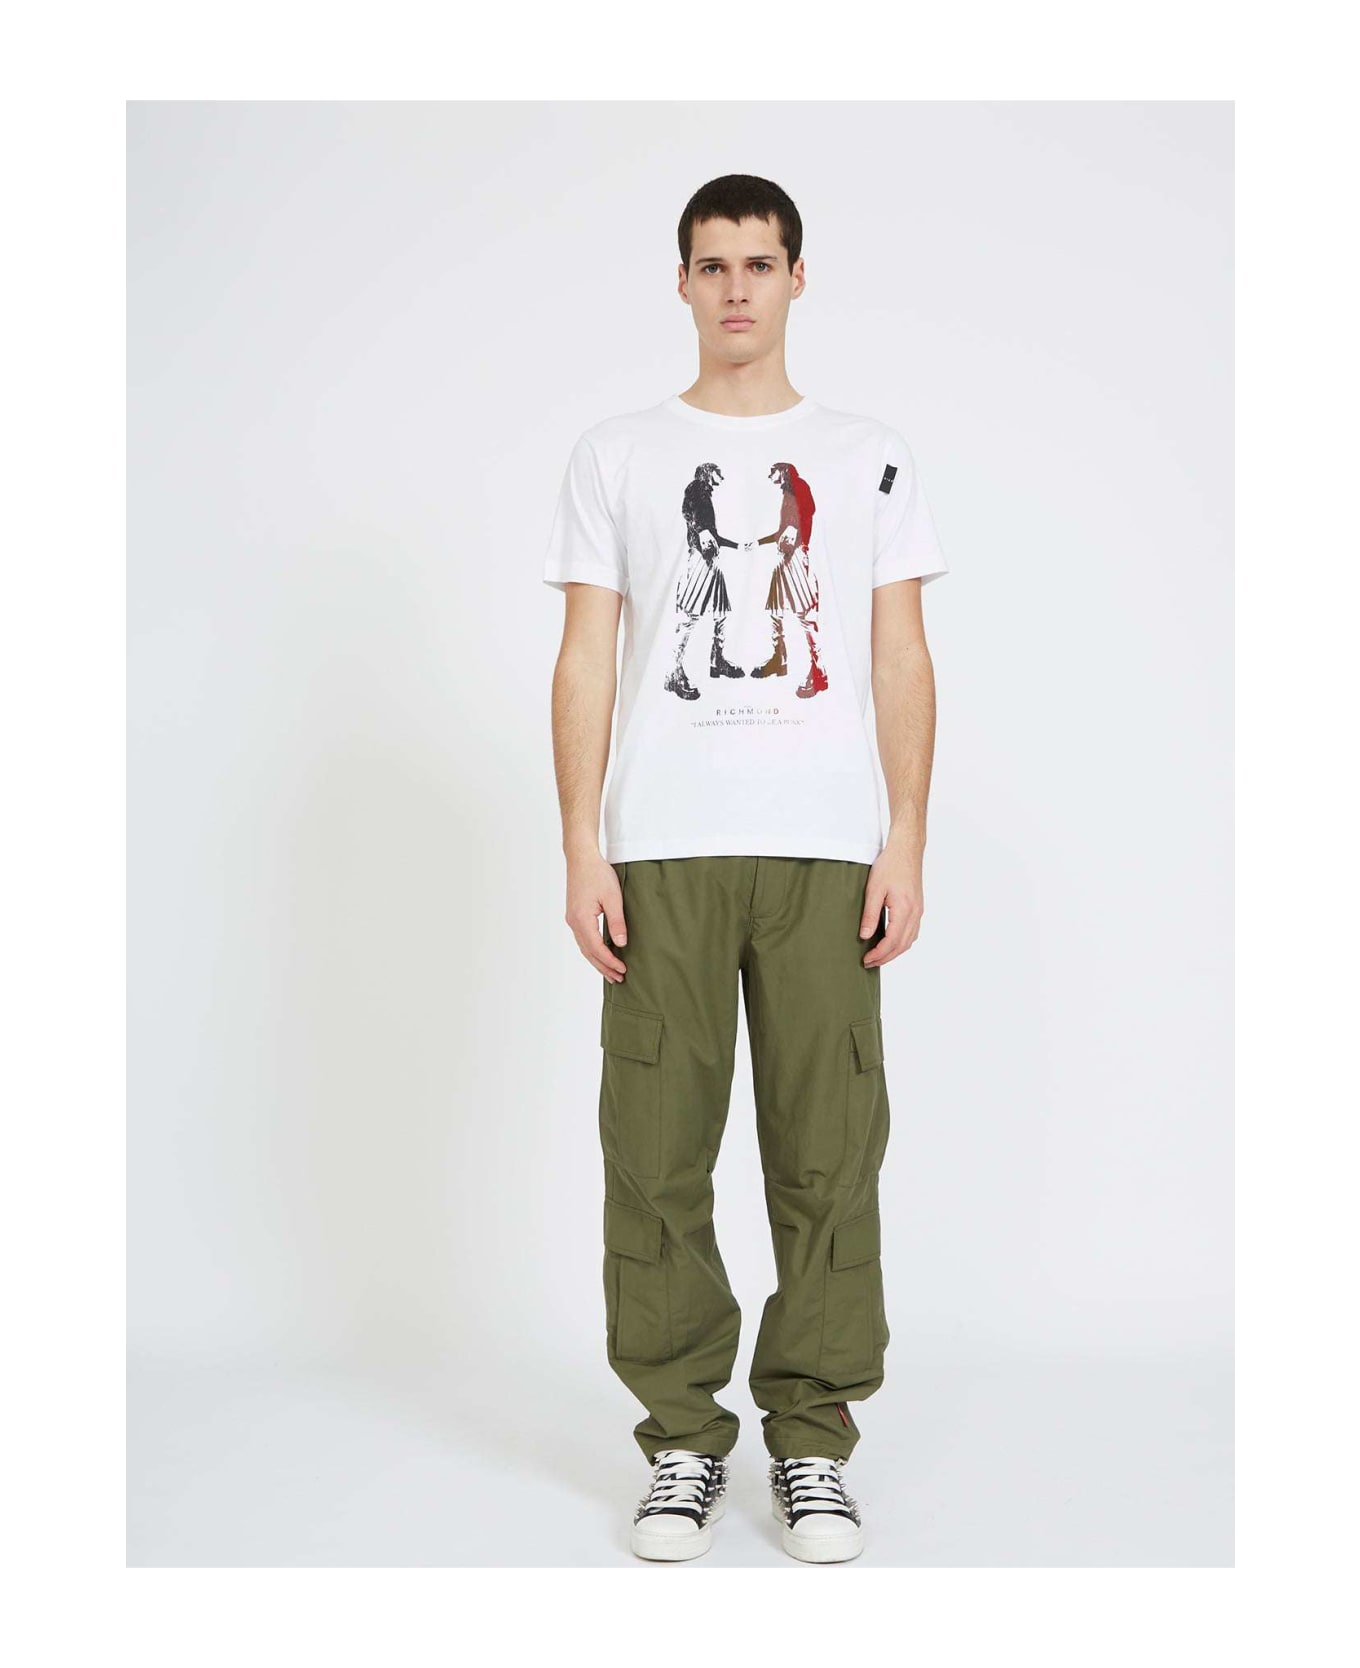 John Richmond Trousers With Front Pockets - Verde